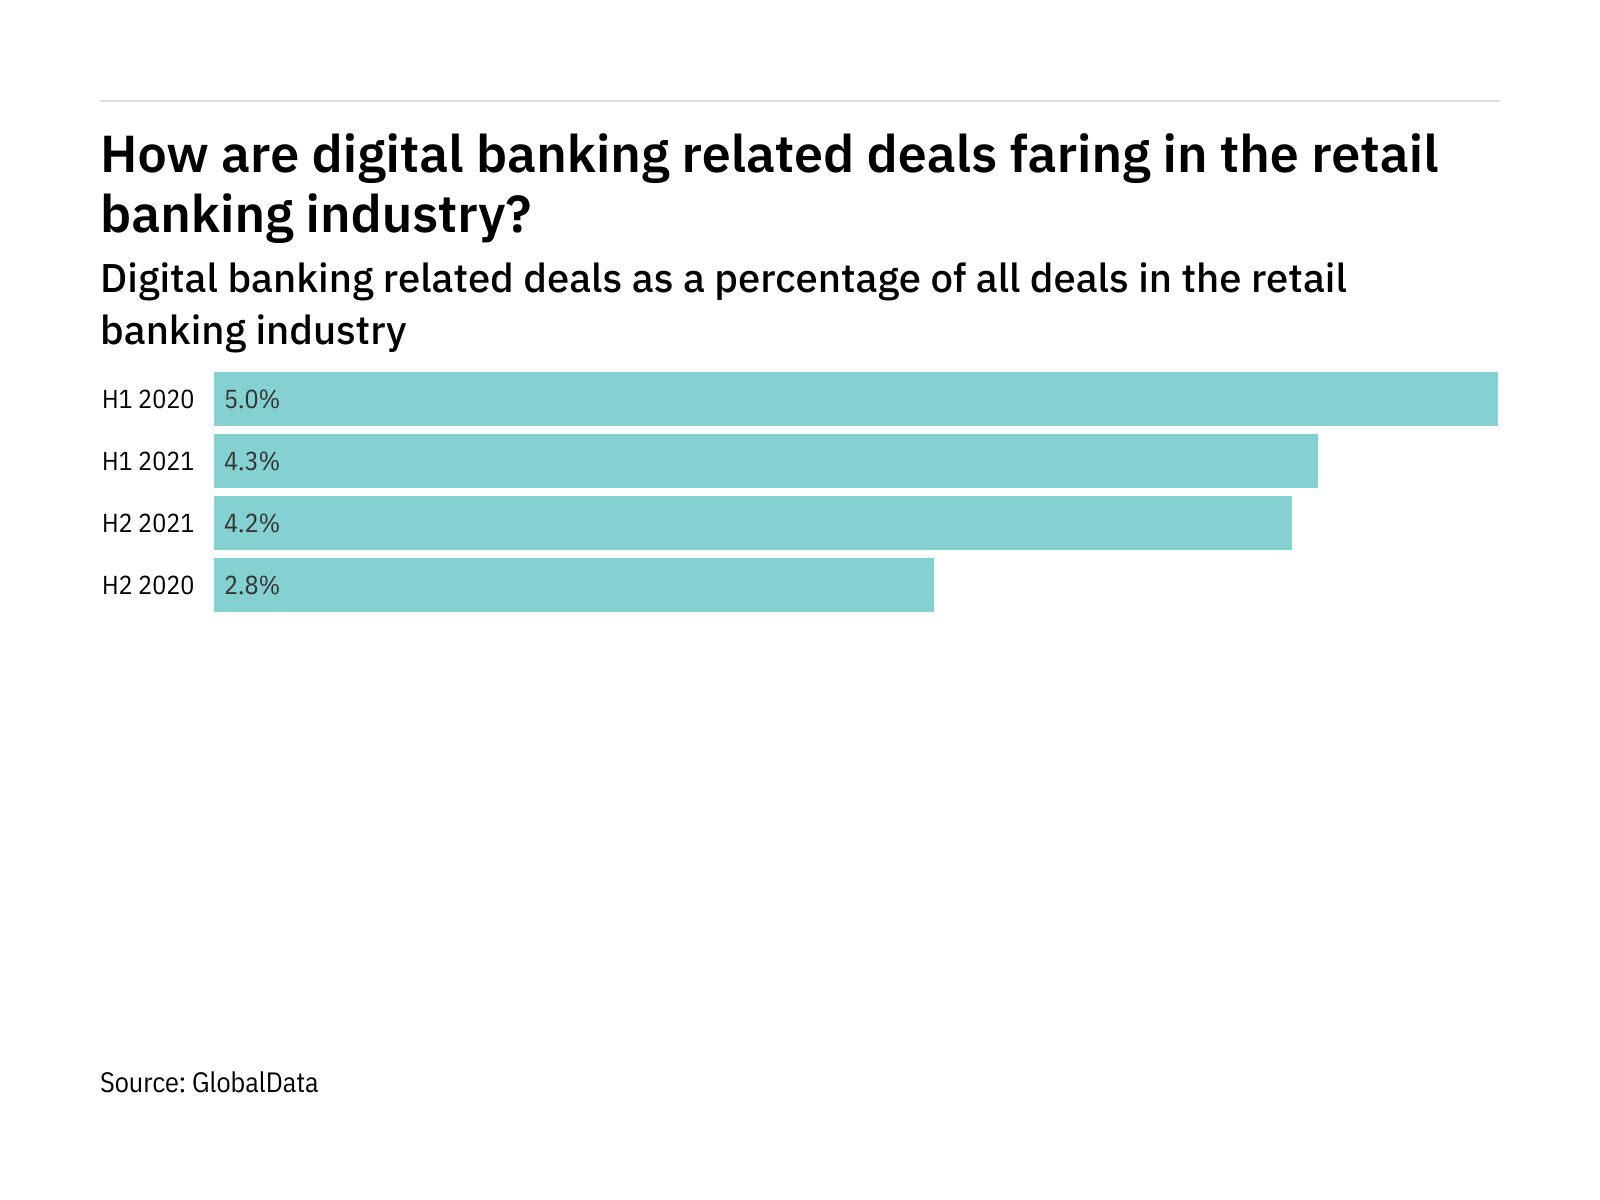 Deals relating to digital banking increased significantly in the retail banking industry in H2 2021